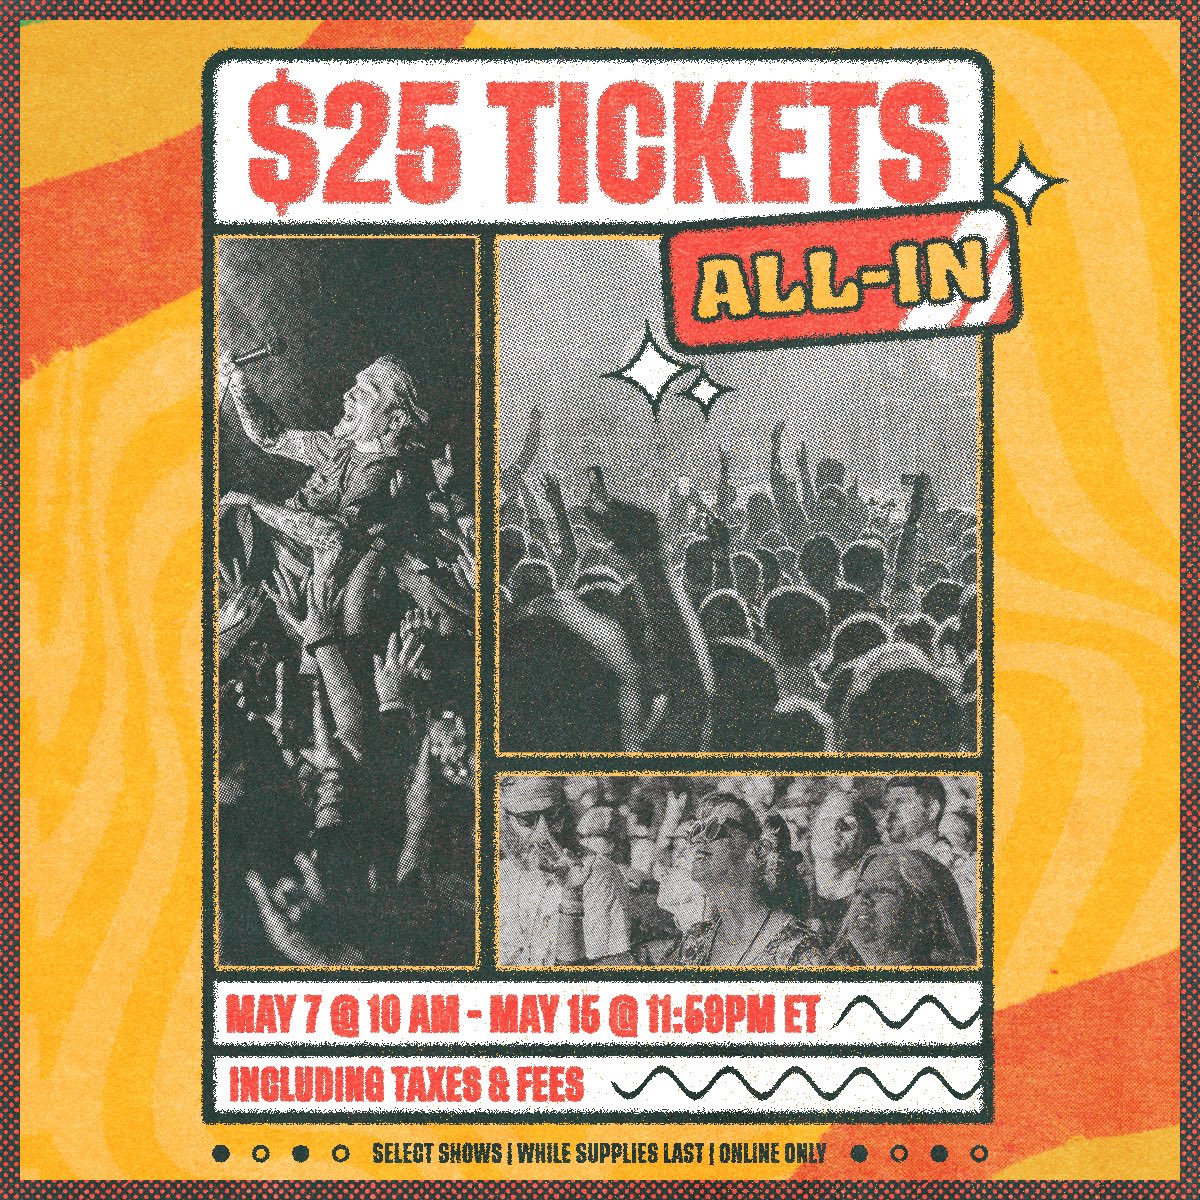 🔥🎫 $25 ALL-IN TICKETS 🔥🎫 From May 7 at 10am to May 15 at 11:59pm, grab your friends & grab $25 all-in tickets to select shows like A Day To Remember, Eric Andre, New Found Glory, & more at @AgoraCLE & @JacobsPavilion! 🔗: buff.ly/3QmAzIY